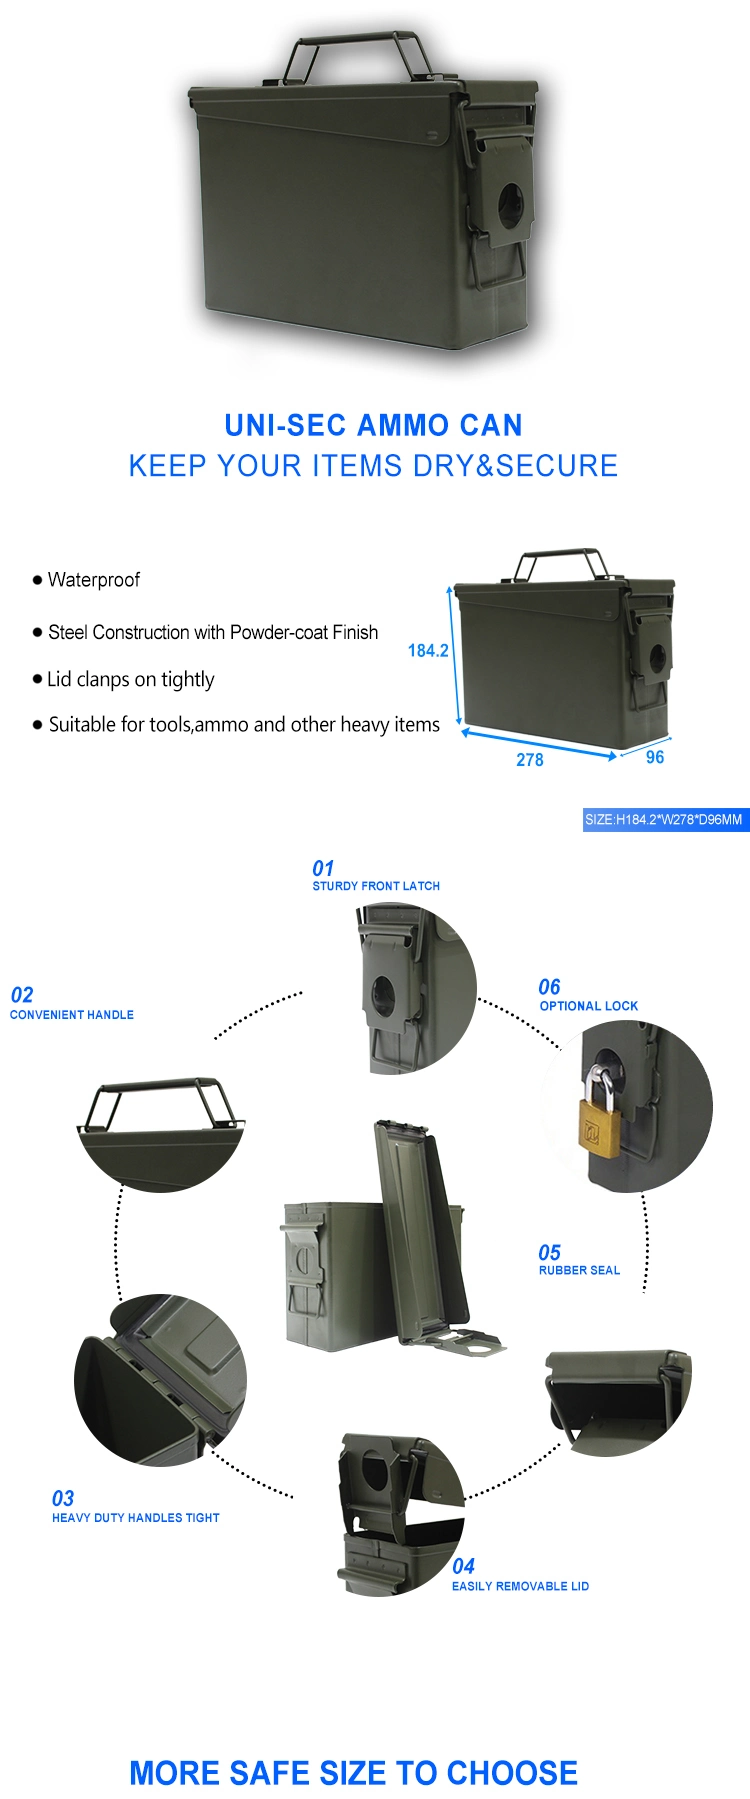 Uni-Sec Fast Delivery Realistic Lifesize Mini Can Gel Blaster Ammo 30mm Ammo Can Wholesale in China (AC-1828)